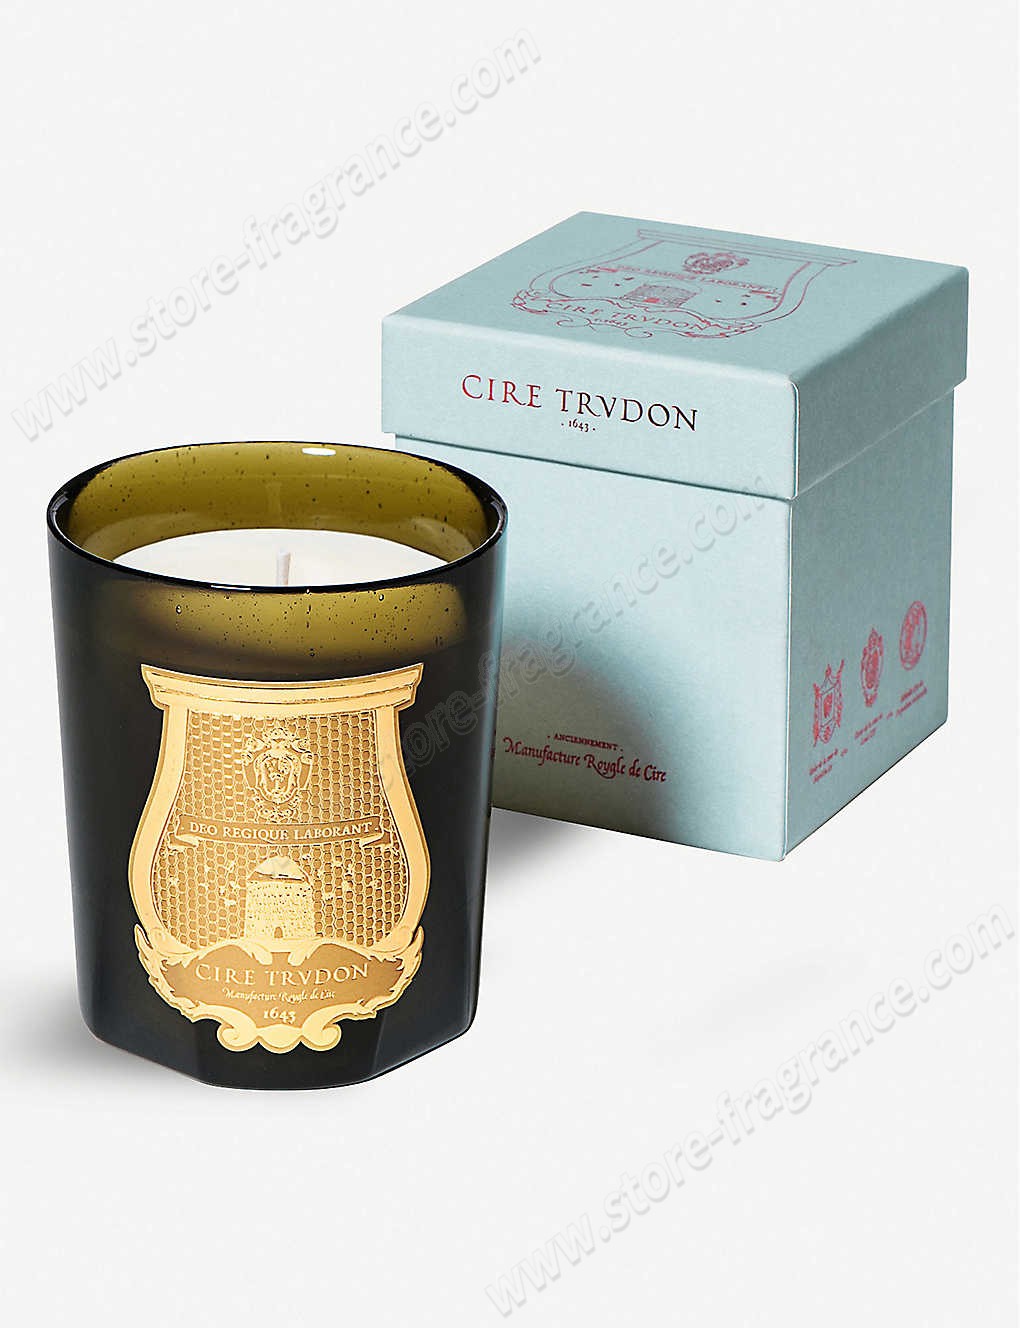 CIRE TRUDON/Gabriel scented beeswax candle 270g ✿ Discount Store - CIRE TRUDON/Gabriel scented beeswax candle 270g ✿ Discount Store